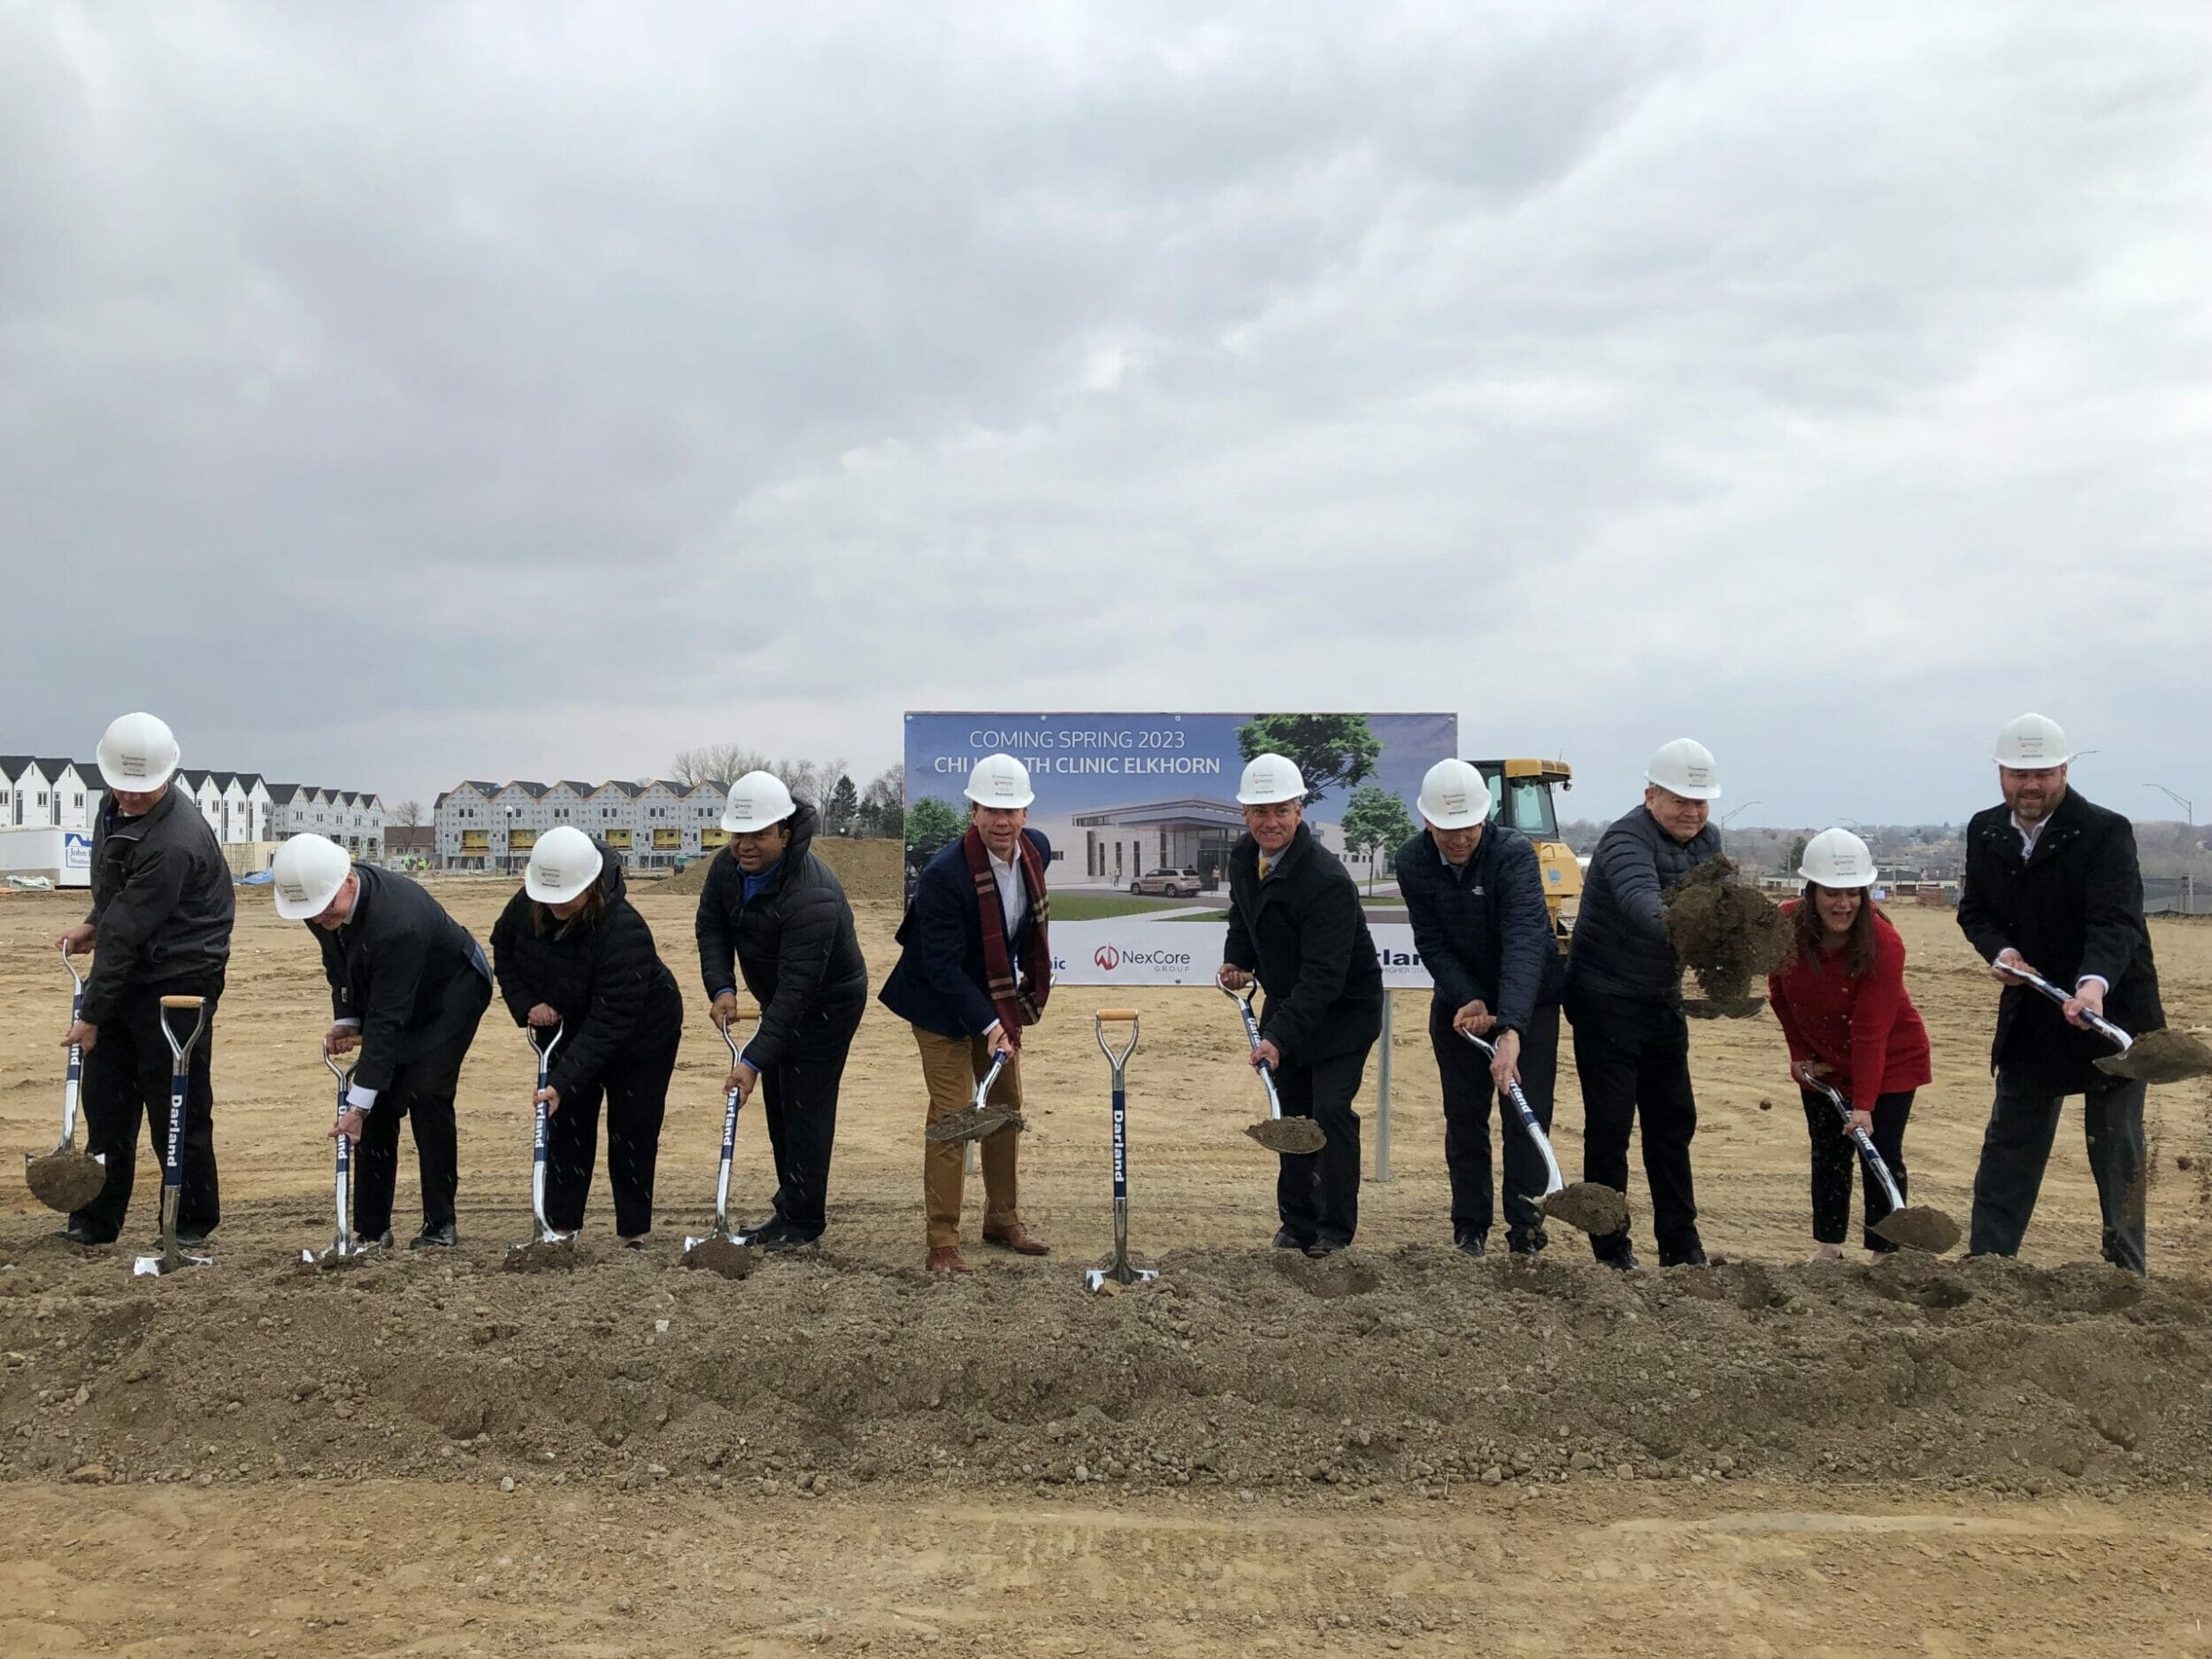 A group at a construction ground break ceremony holding shovels